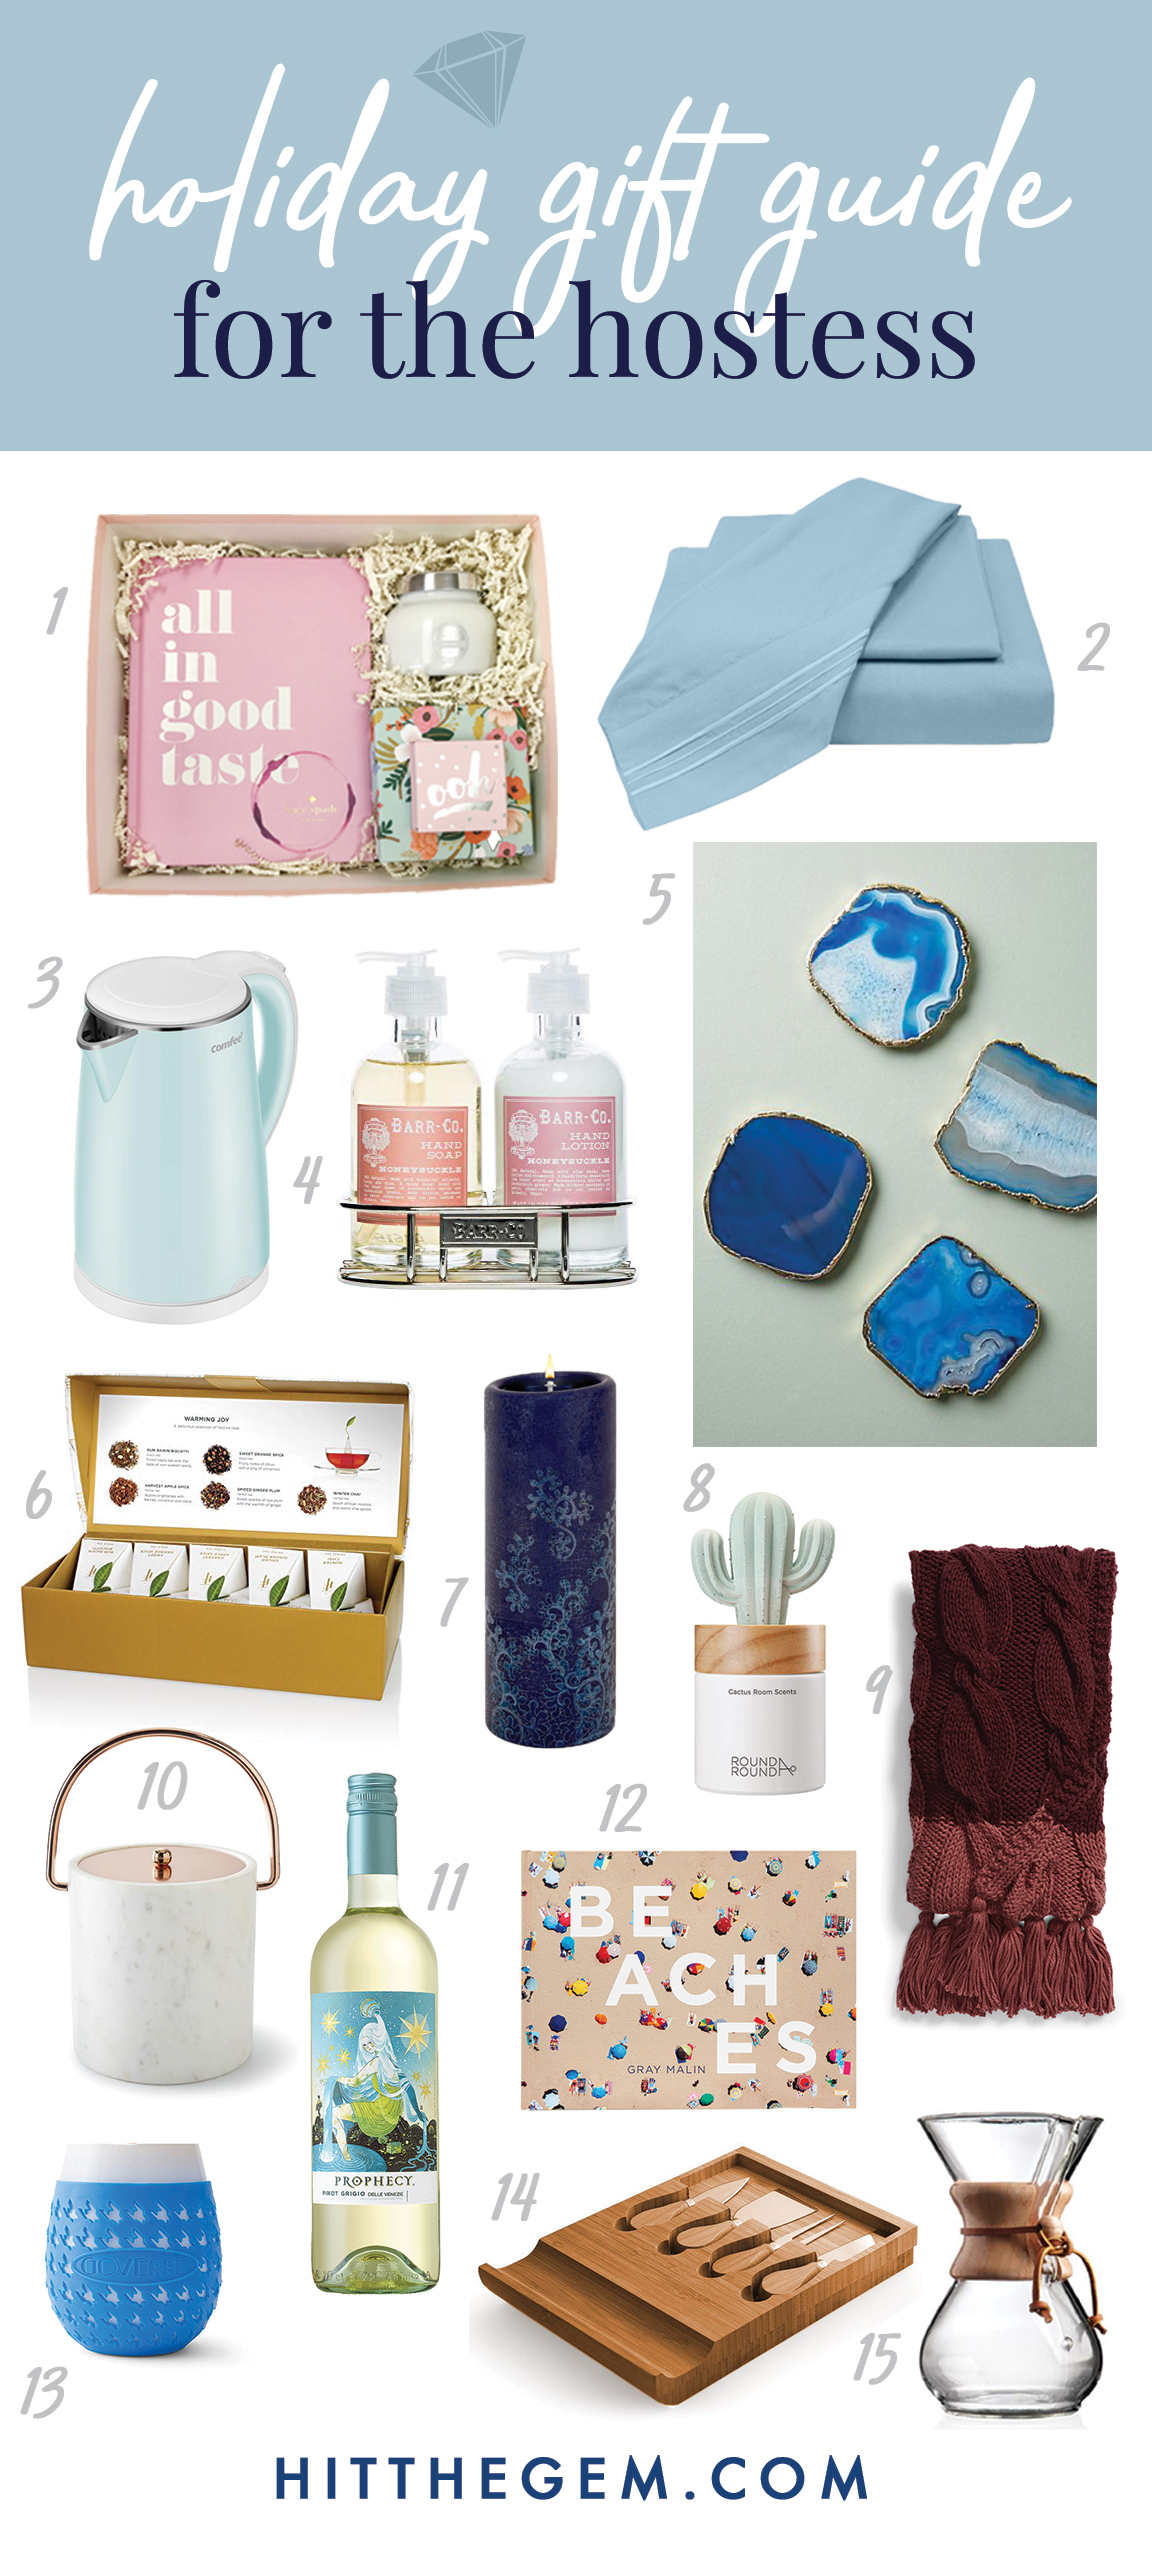 I'm so excited to kick off The Gem's first holiday gift guide for this year! Ready or not, holiday parties are right around the corner, so whether you're looking to bring the perfect gift to a party or shopping for your friend who loves to entertain, I've rounded up a selection of thoughtful, chic items as inspiration for appropriate hostess gifts! From curated gift boxes to delightful home decor, shop our holiday gift guide for unique gifts for the hostess this season.